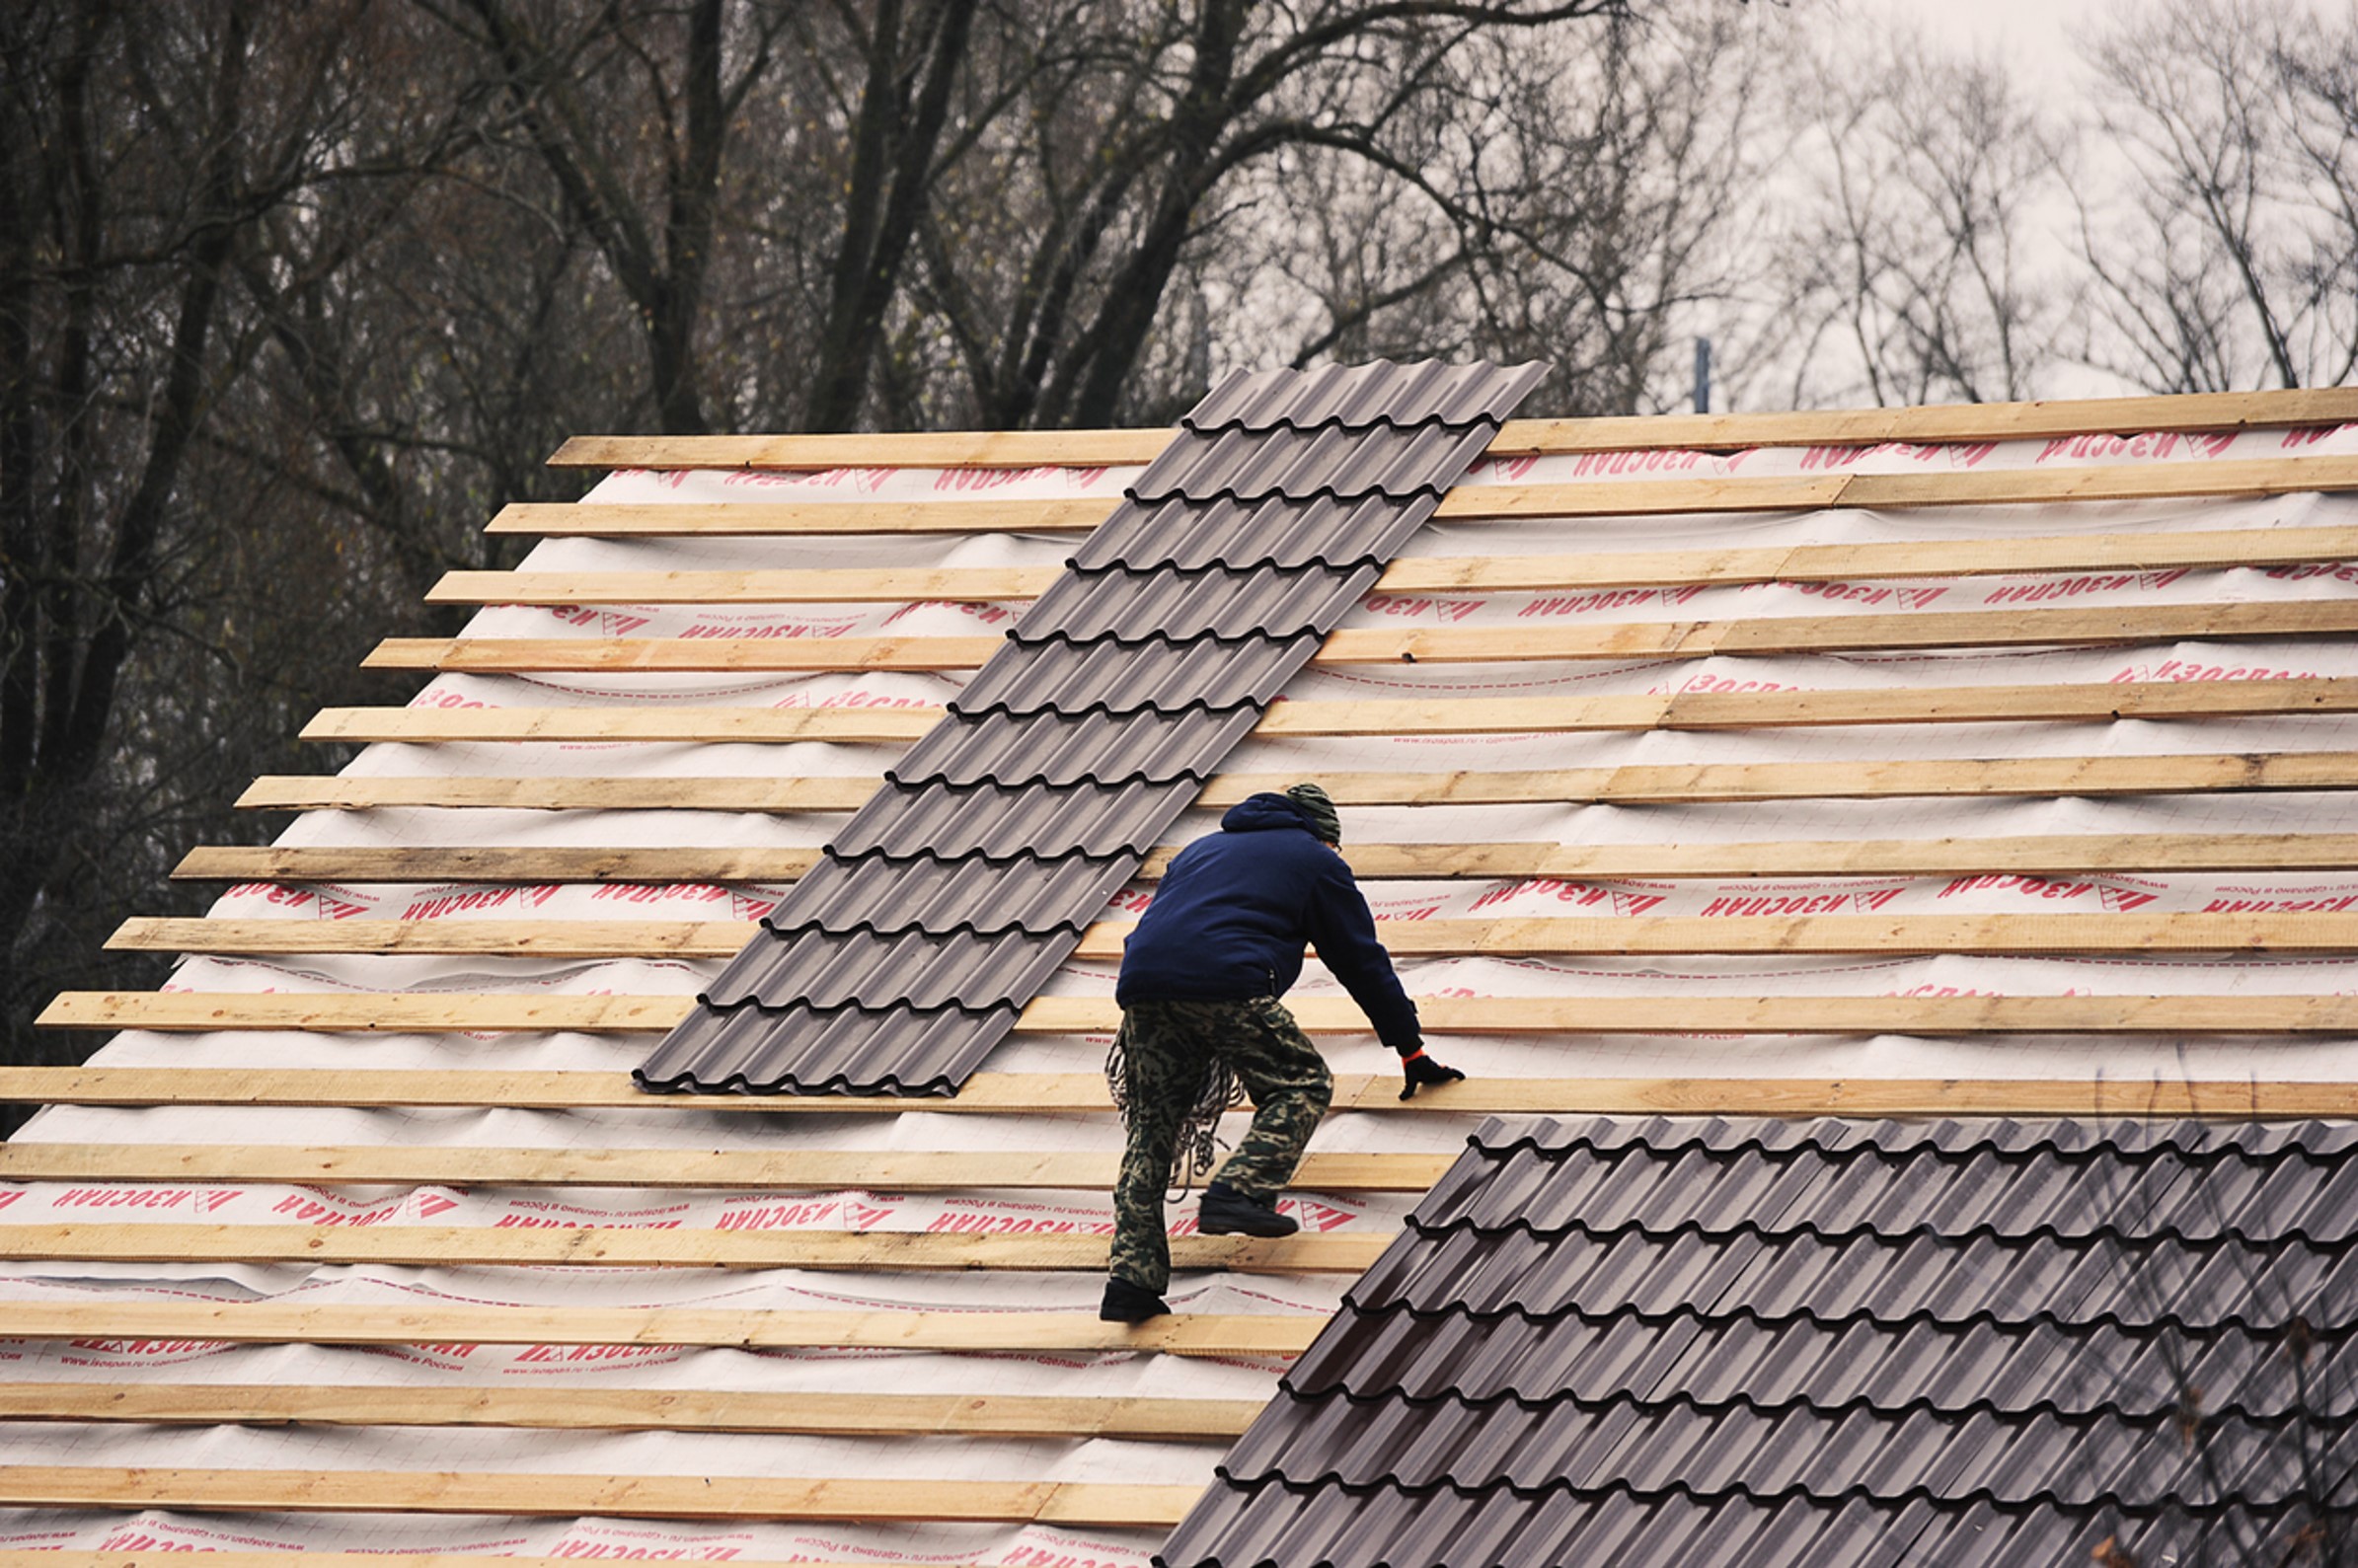 A Man Wearing Cup and Blue Coat Working on a Roof